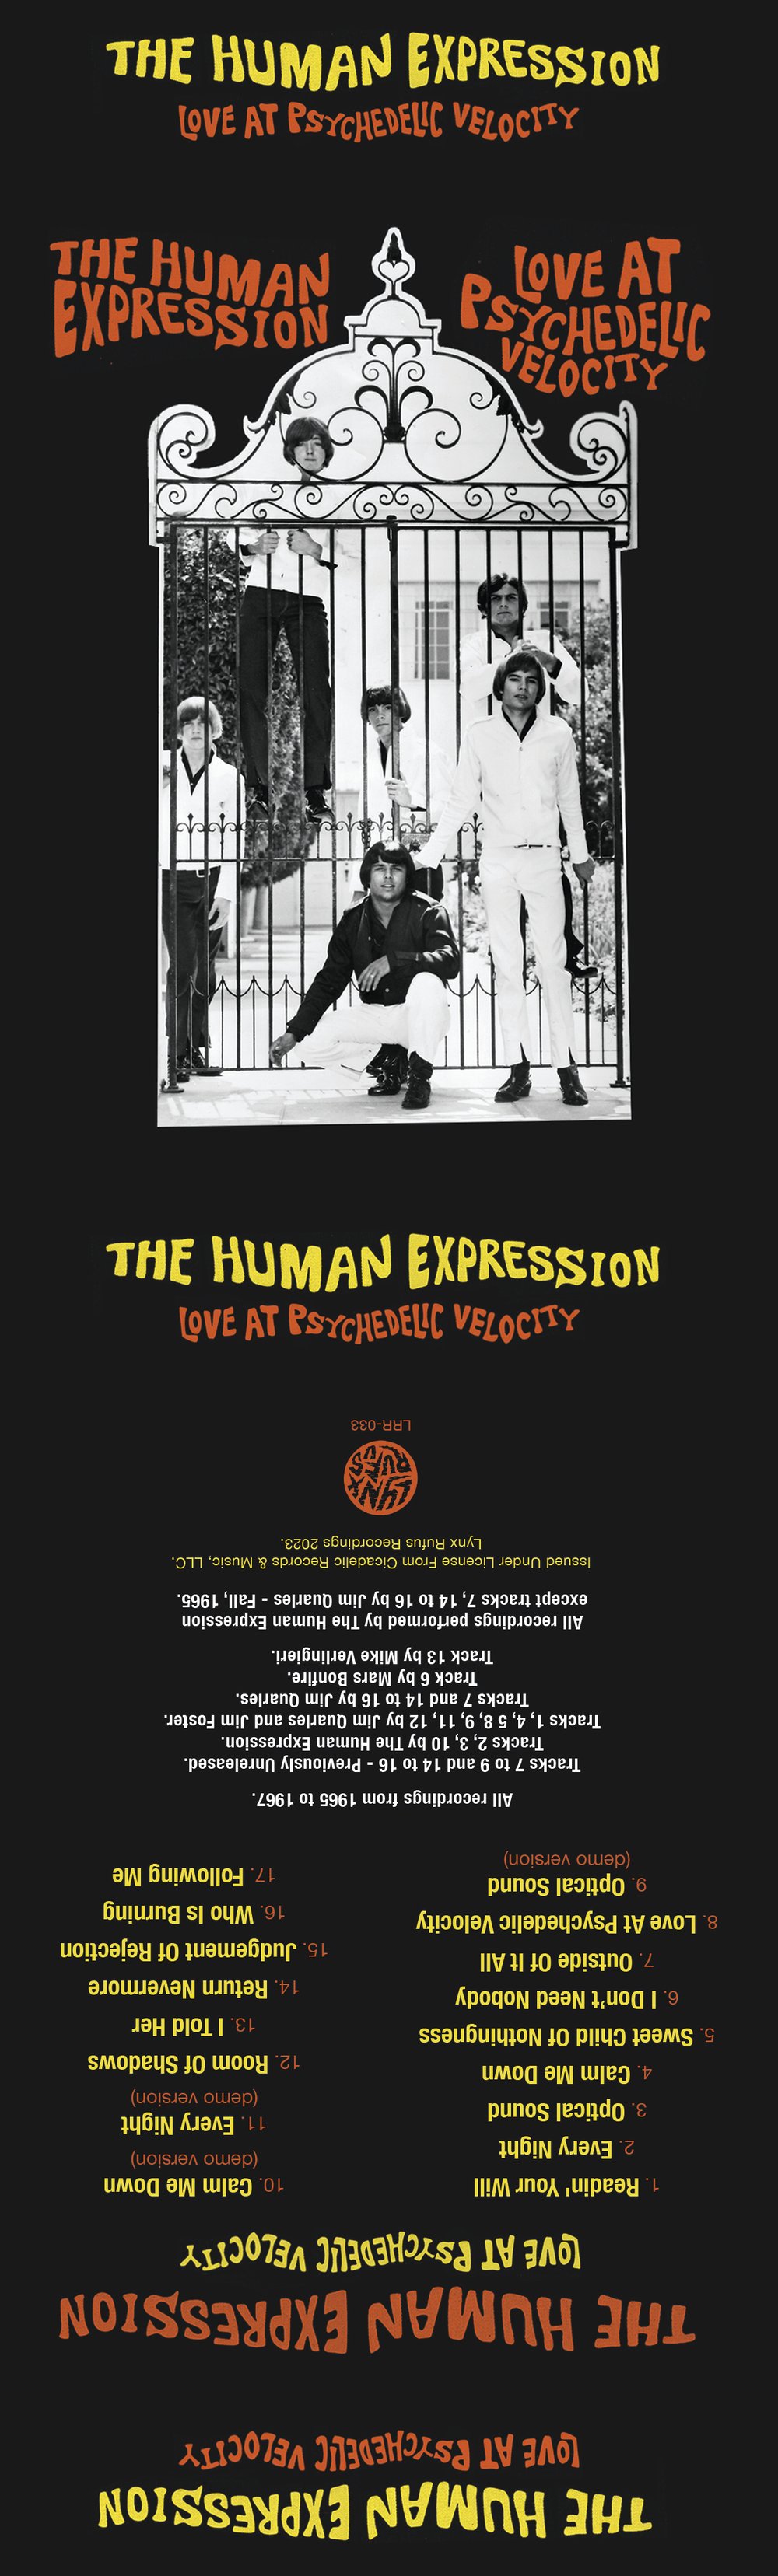 The Human Expression 8 Track